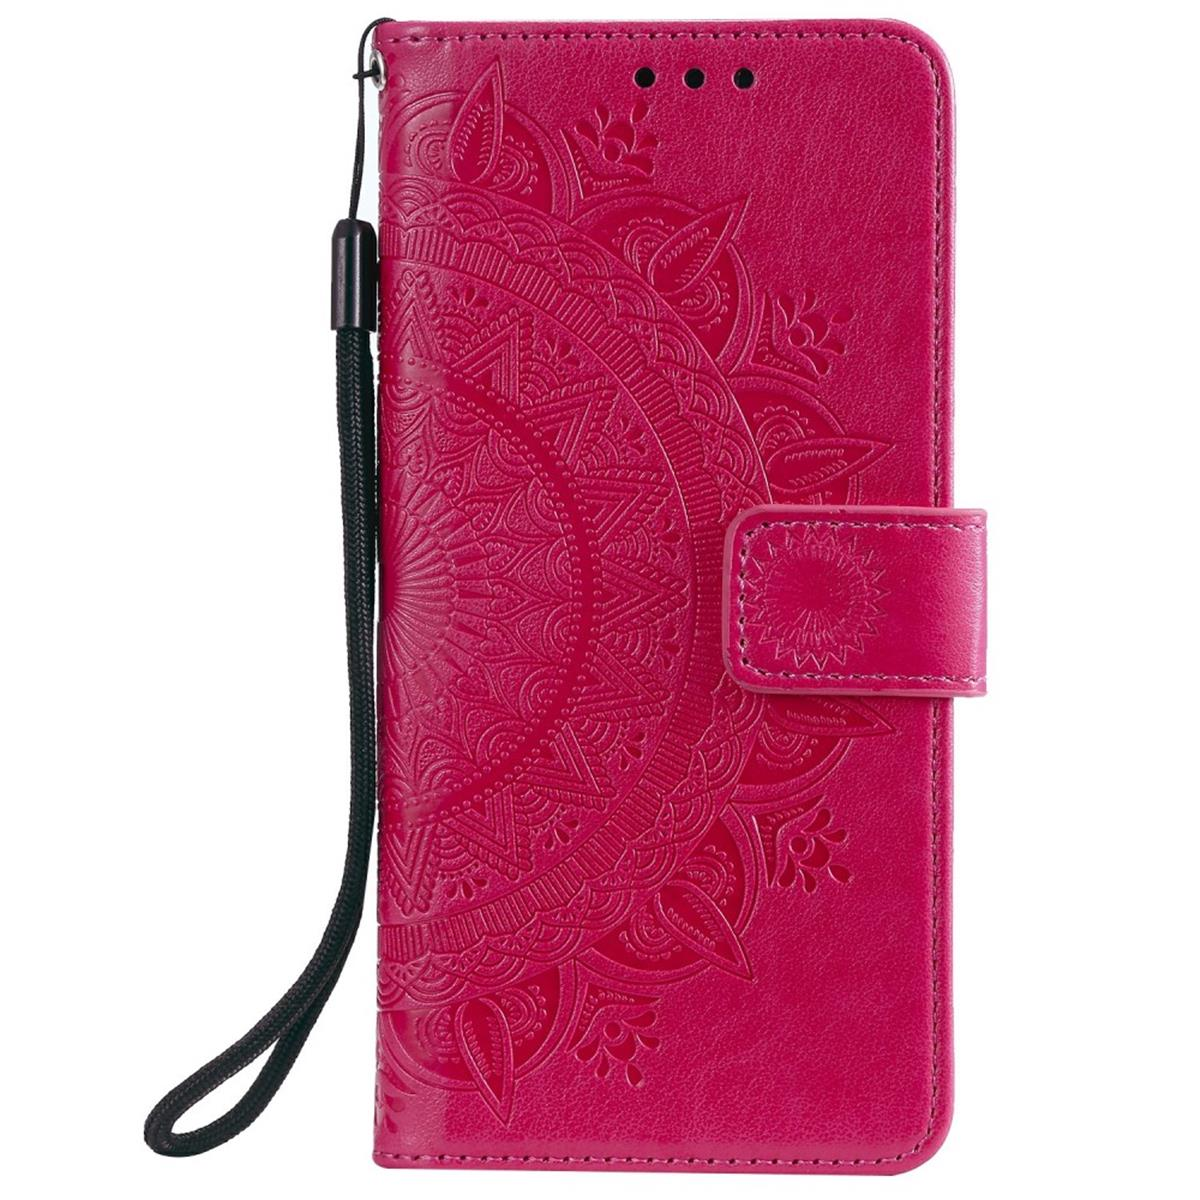 COVERKINGZ Klapphülle mit Mandala Muster, A02s, Galaxy Bookcover, Samsung, Pink